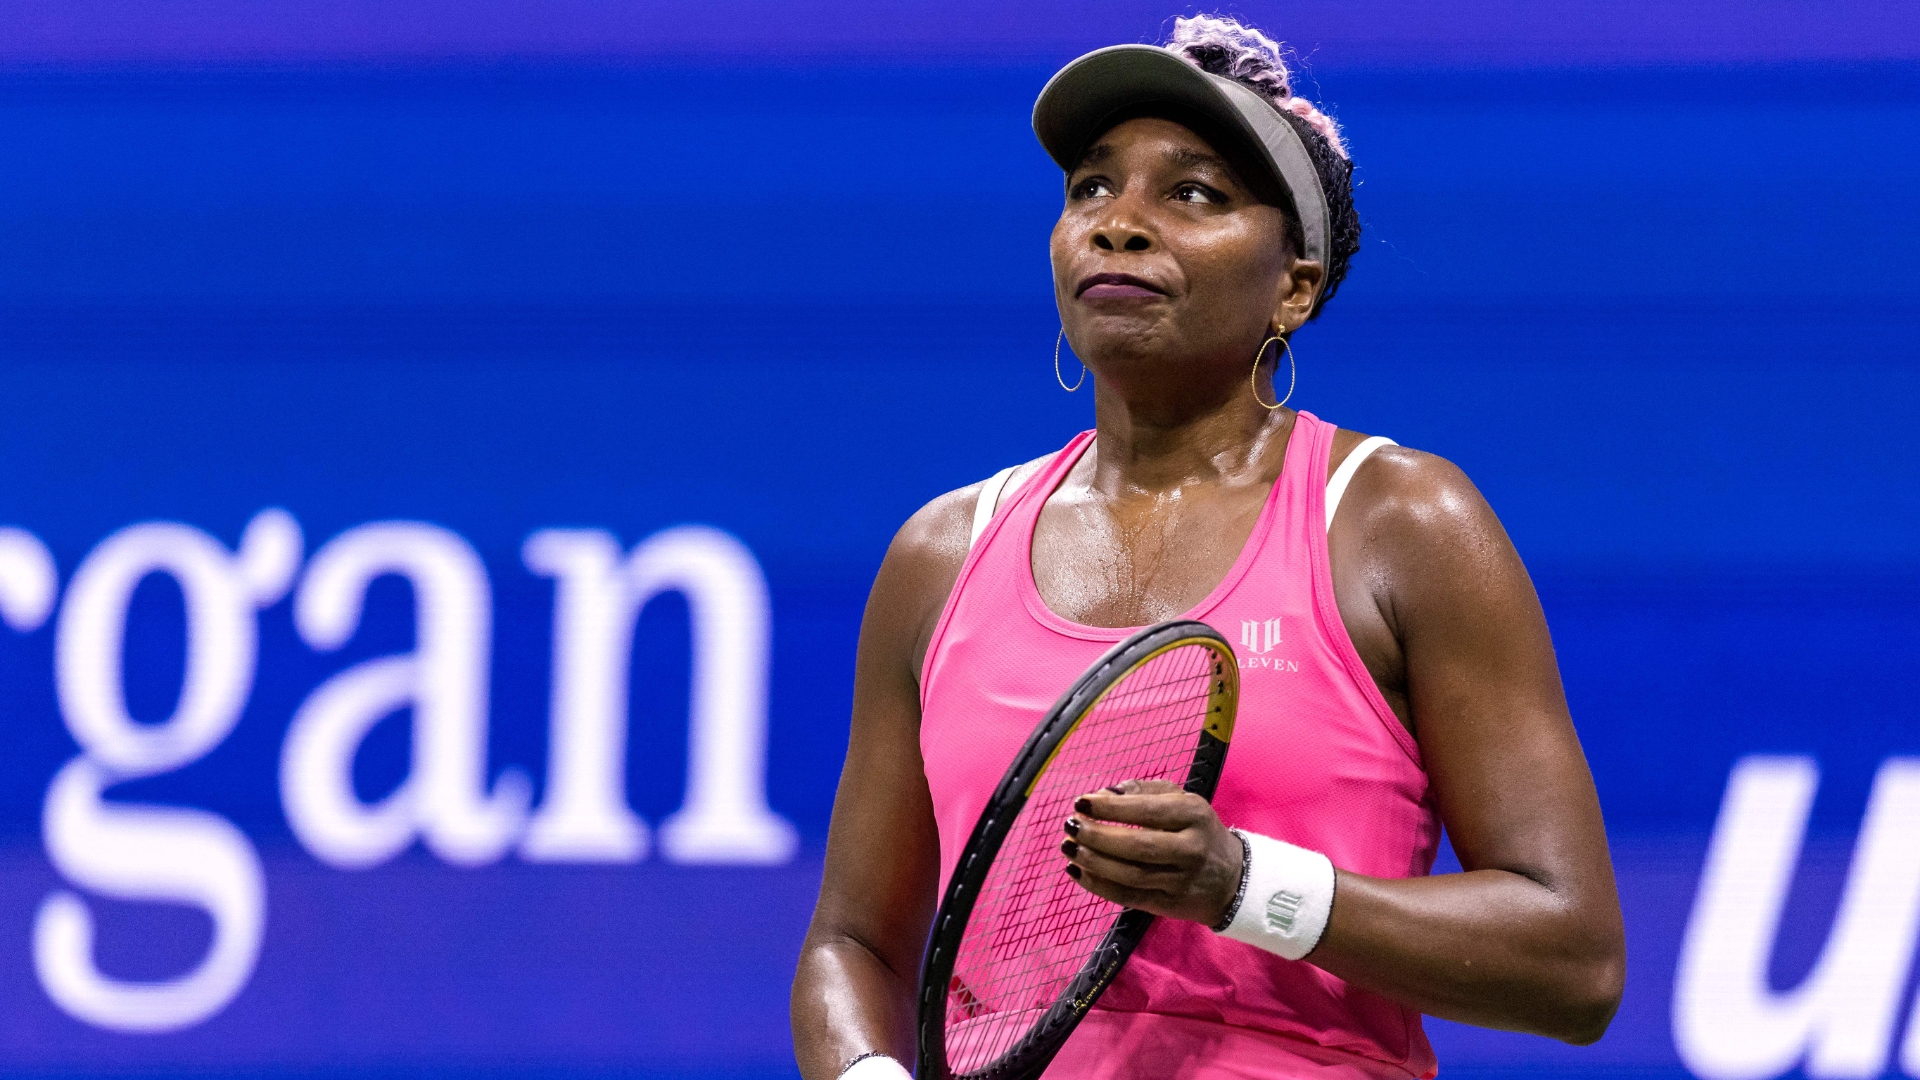 Venus Williams falls in straight sets in her 24th US Open - Stream the Video